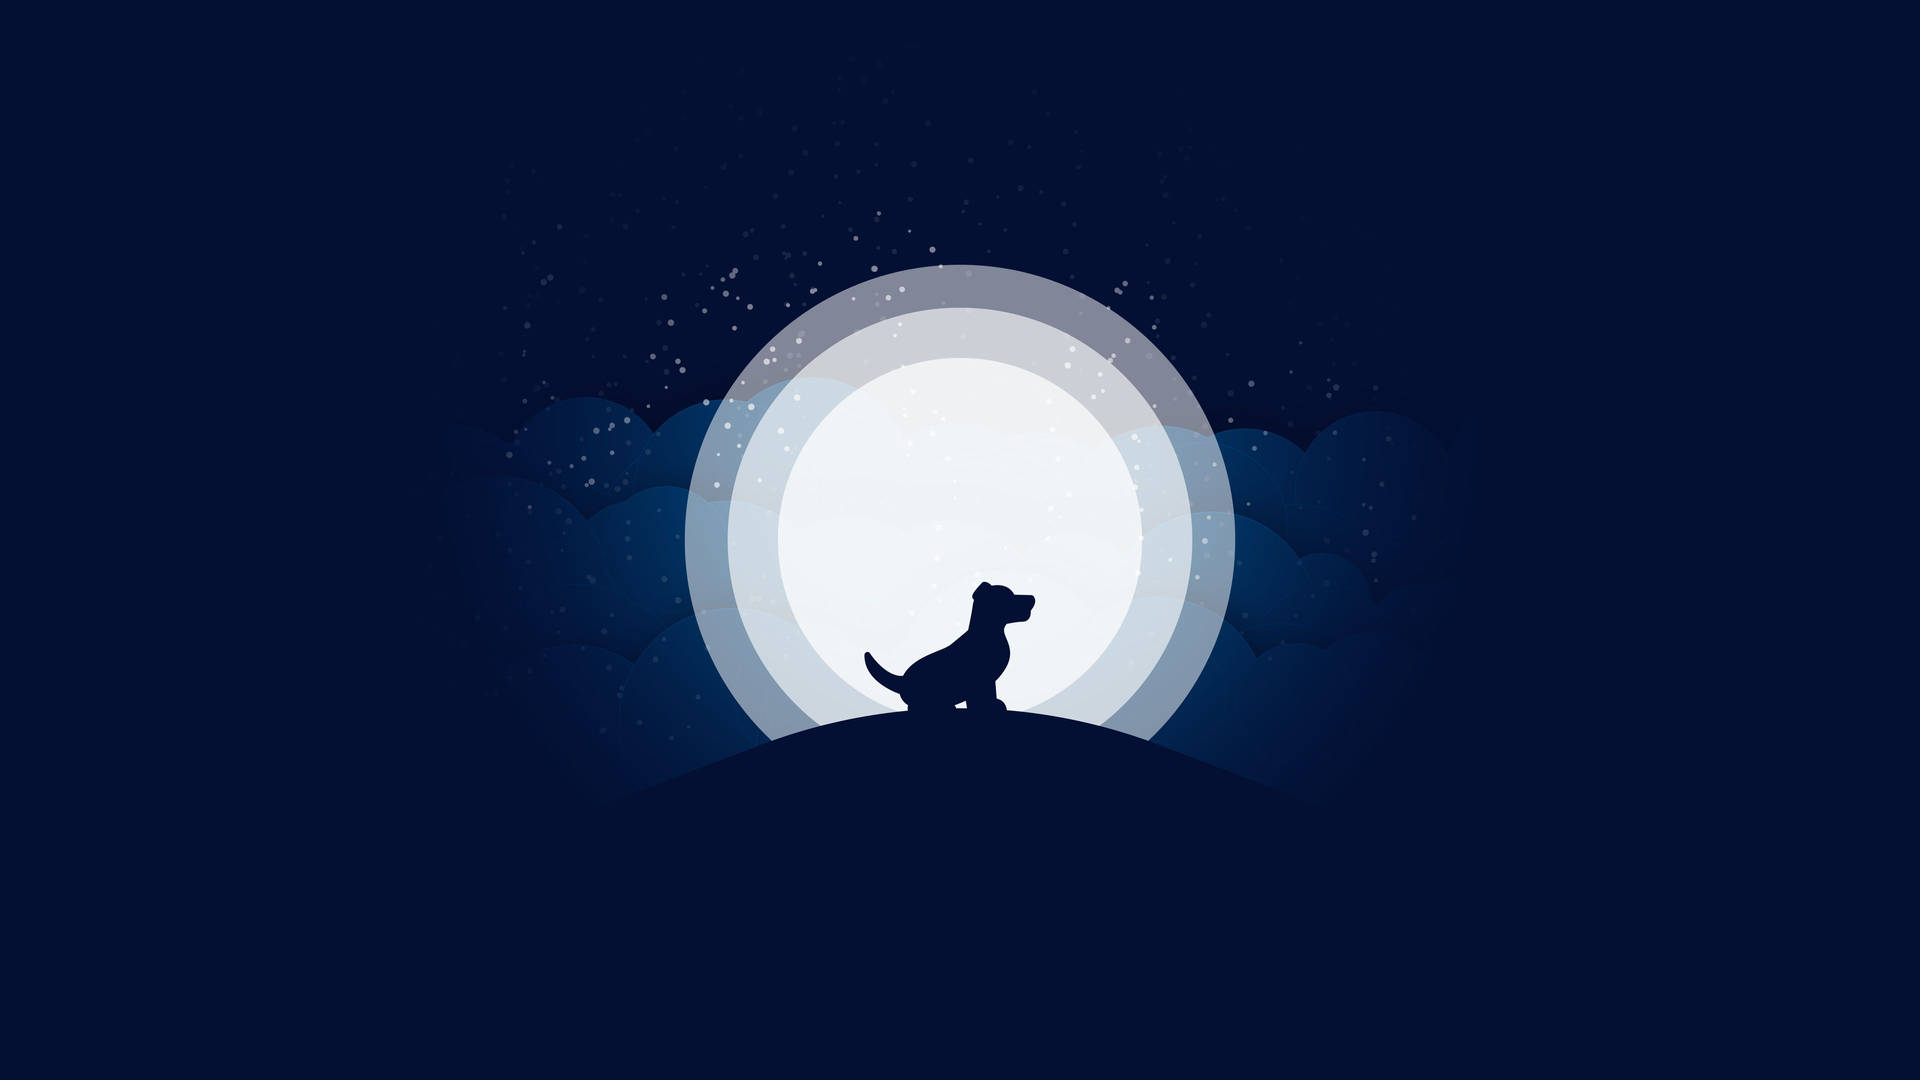 Moon And Dog Art Background